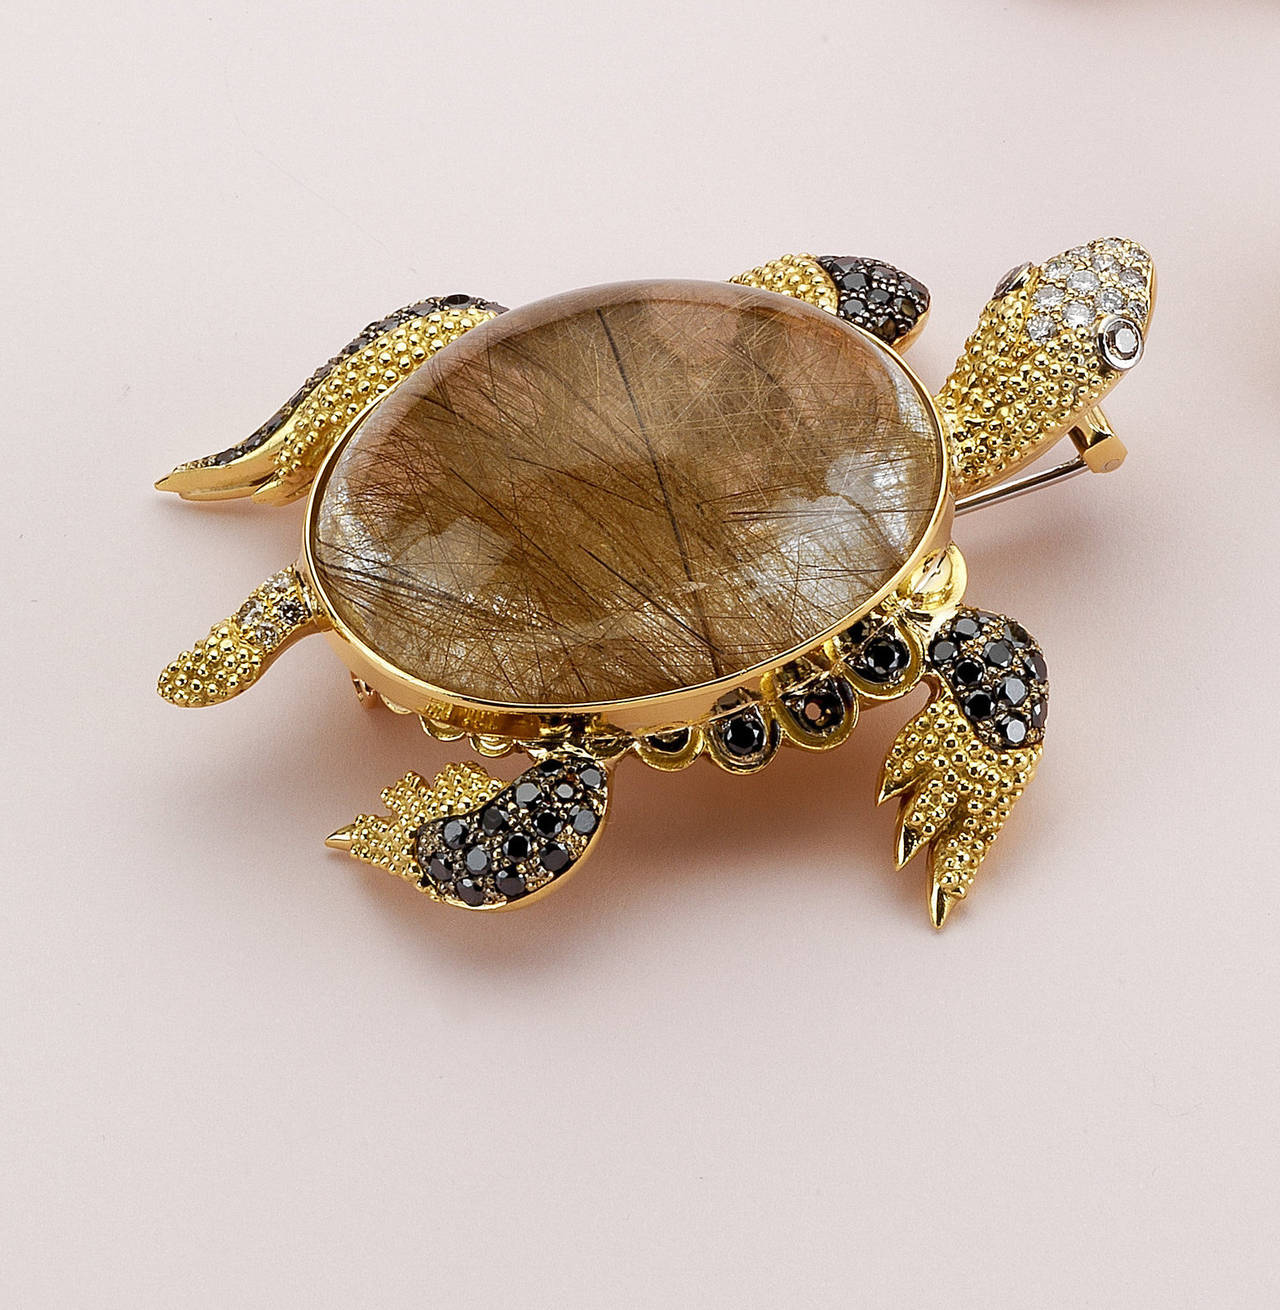 Designed as a sculpted sea turtle with brown diamond eyes. The carapace of the turtle is formed of a large smoky quartz measuring 4x3 cm with white, brown and black diamond accented eyes and flippers, with a total weight of approx. 4.50ct.
Mounted